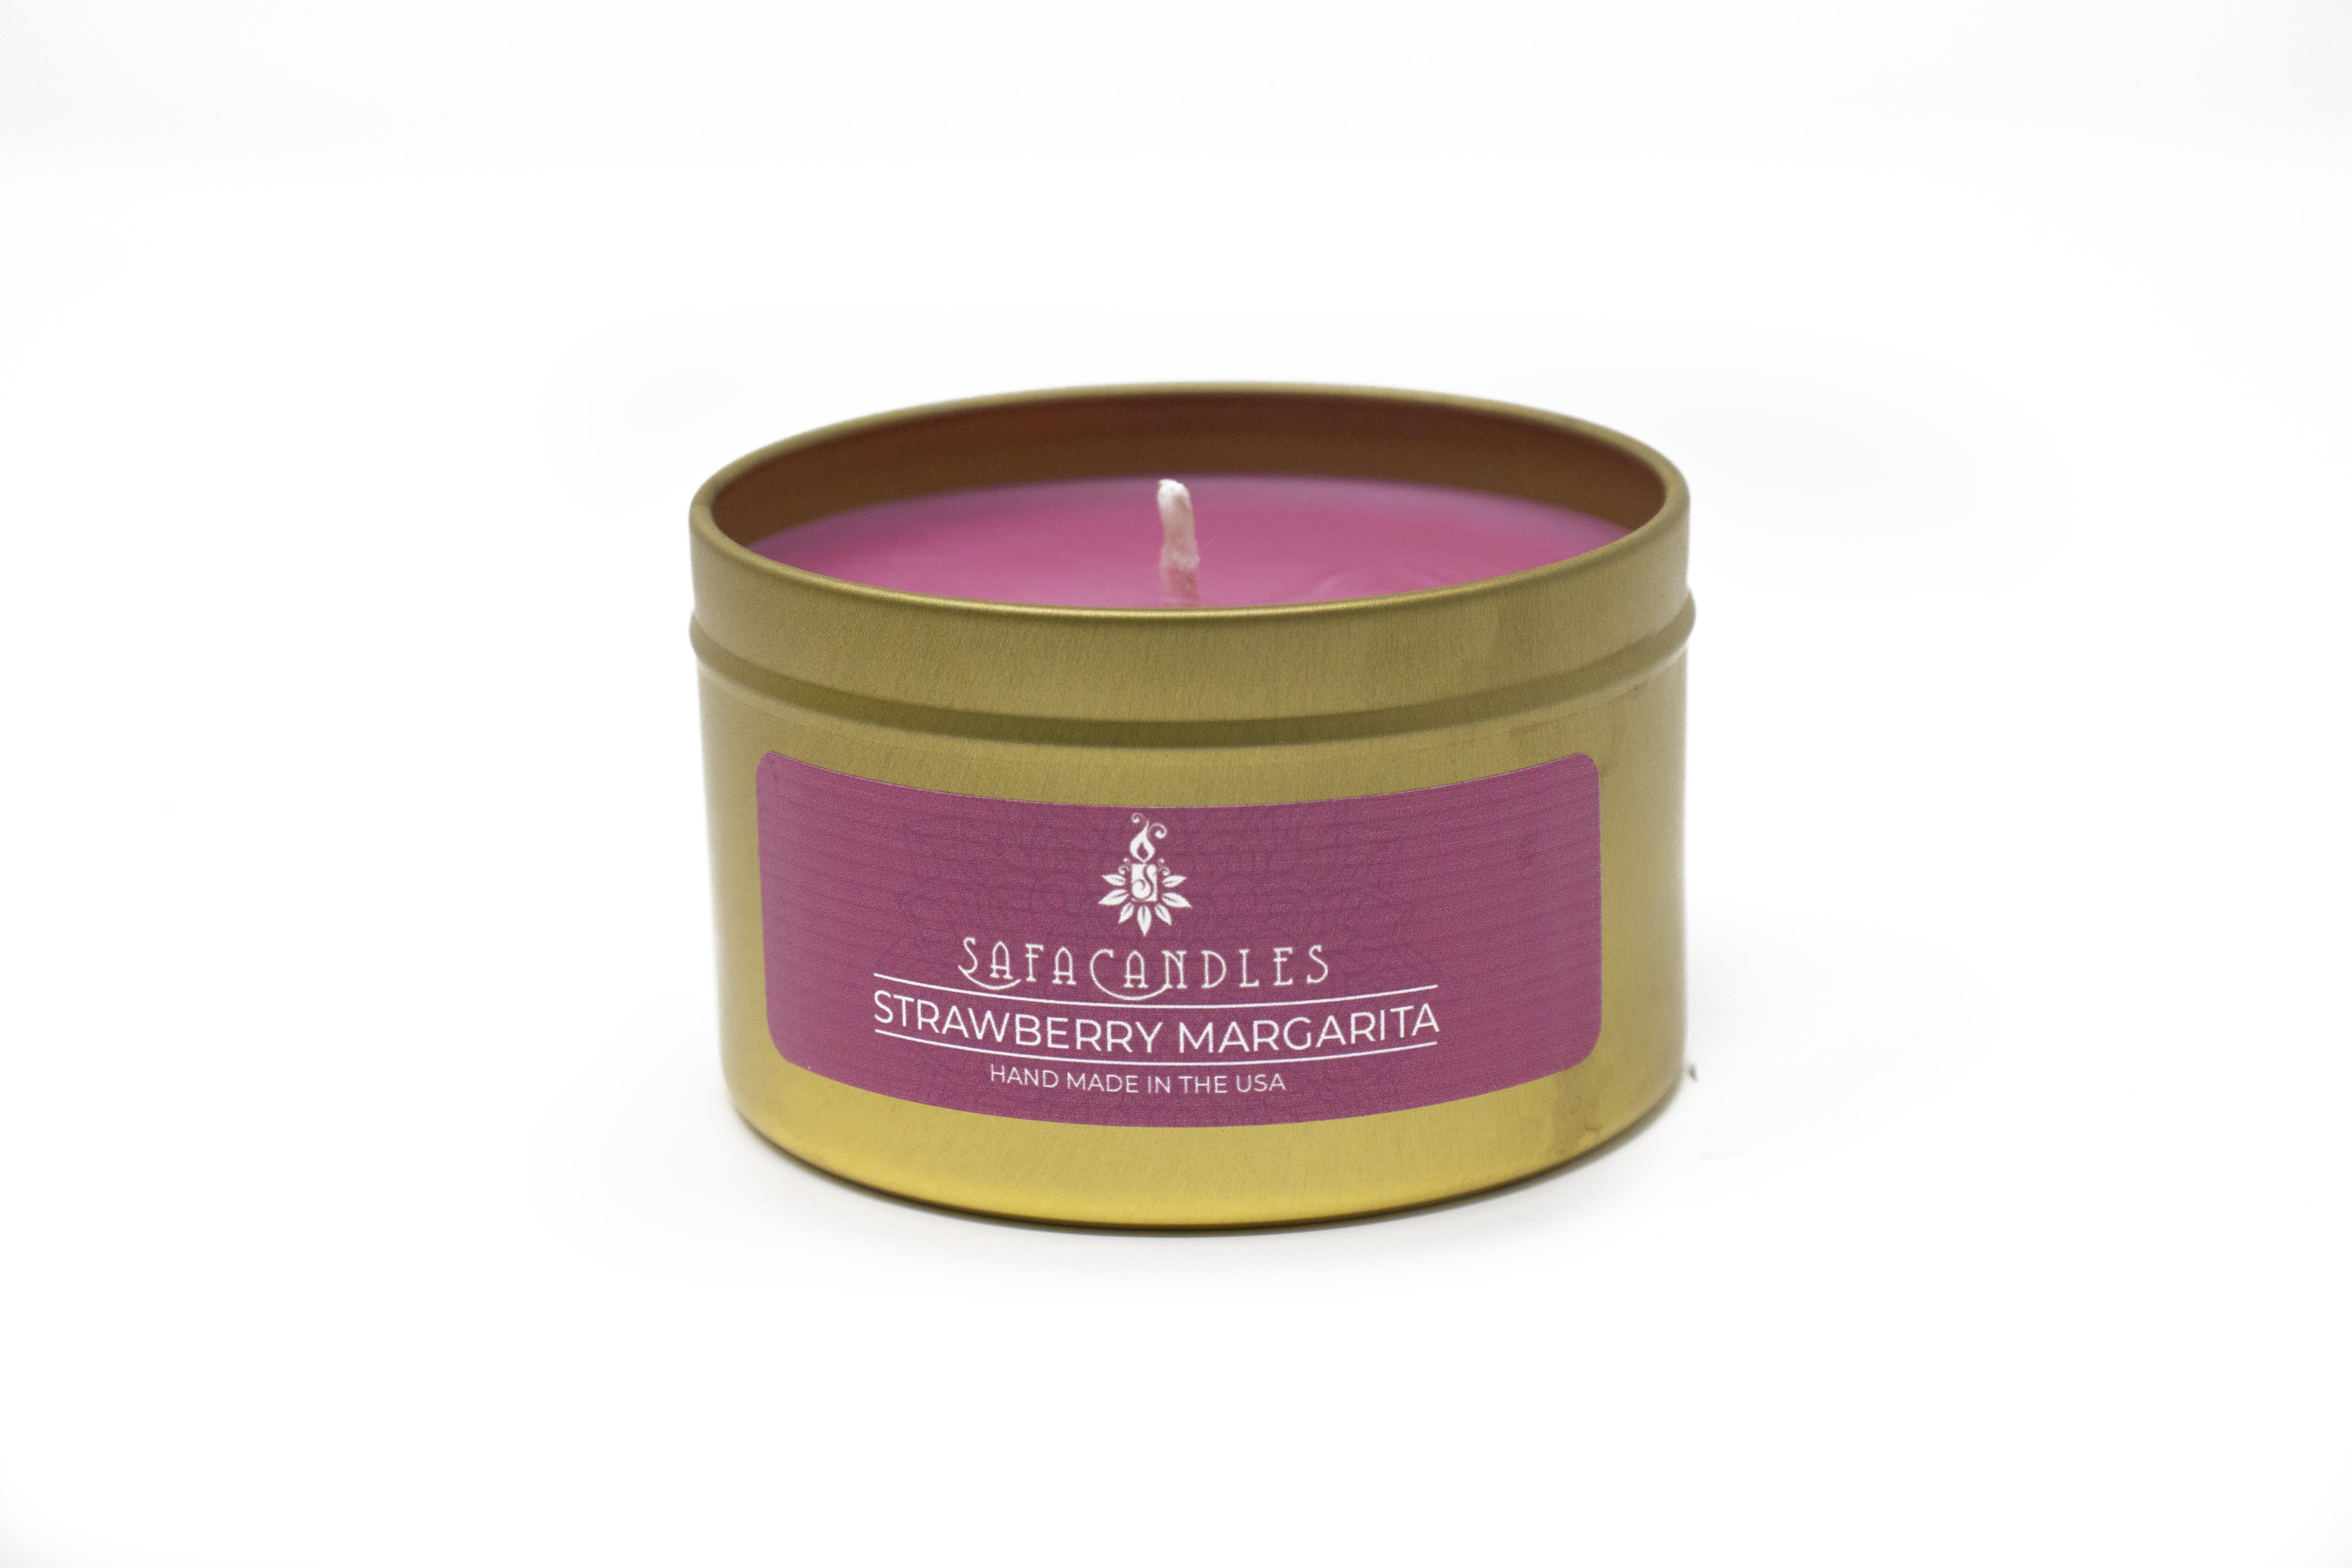 Black Cherry Scented Handmade in the USA. Travel Tin Soy Candles 